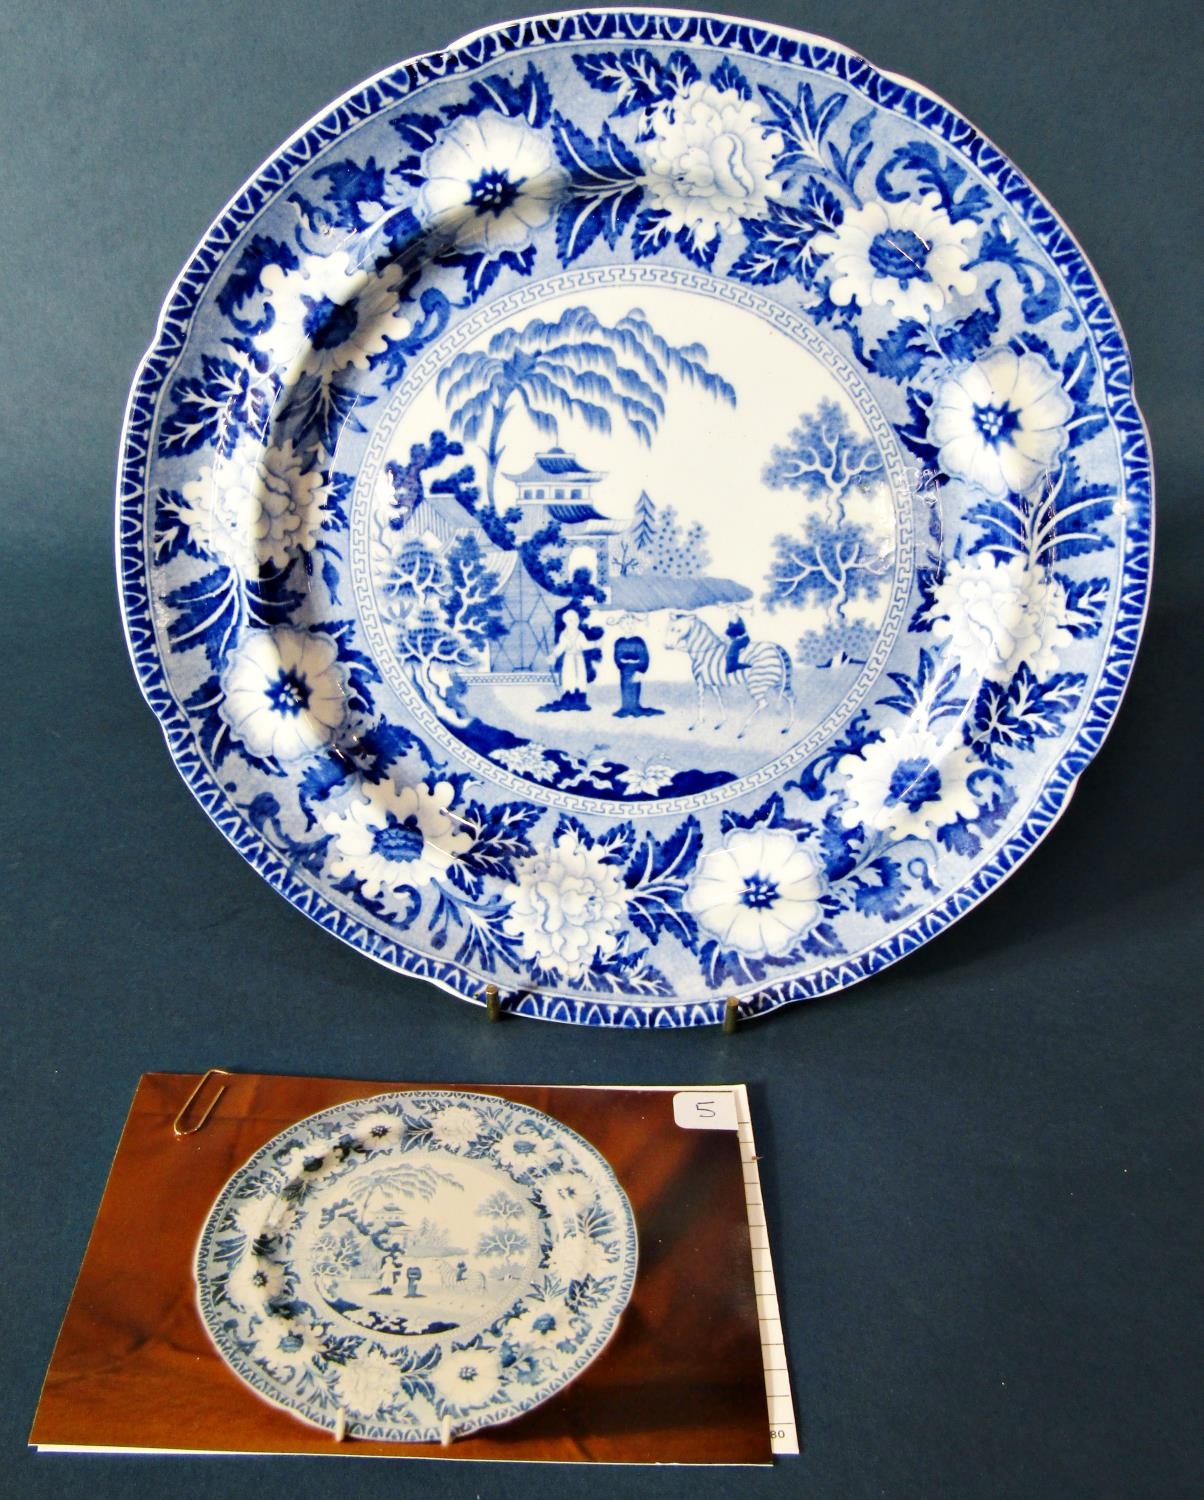 A 19th century blue and white transfer ware plate by Rogers showing a Giraffe and characters in a - Image 2 of 3